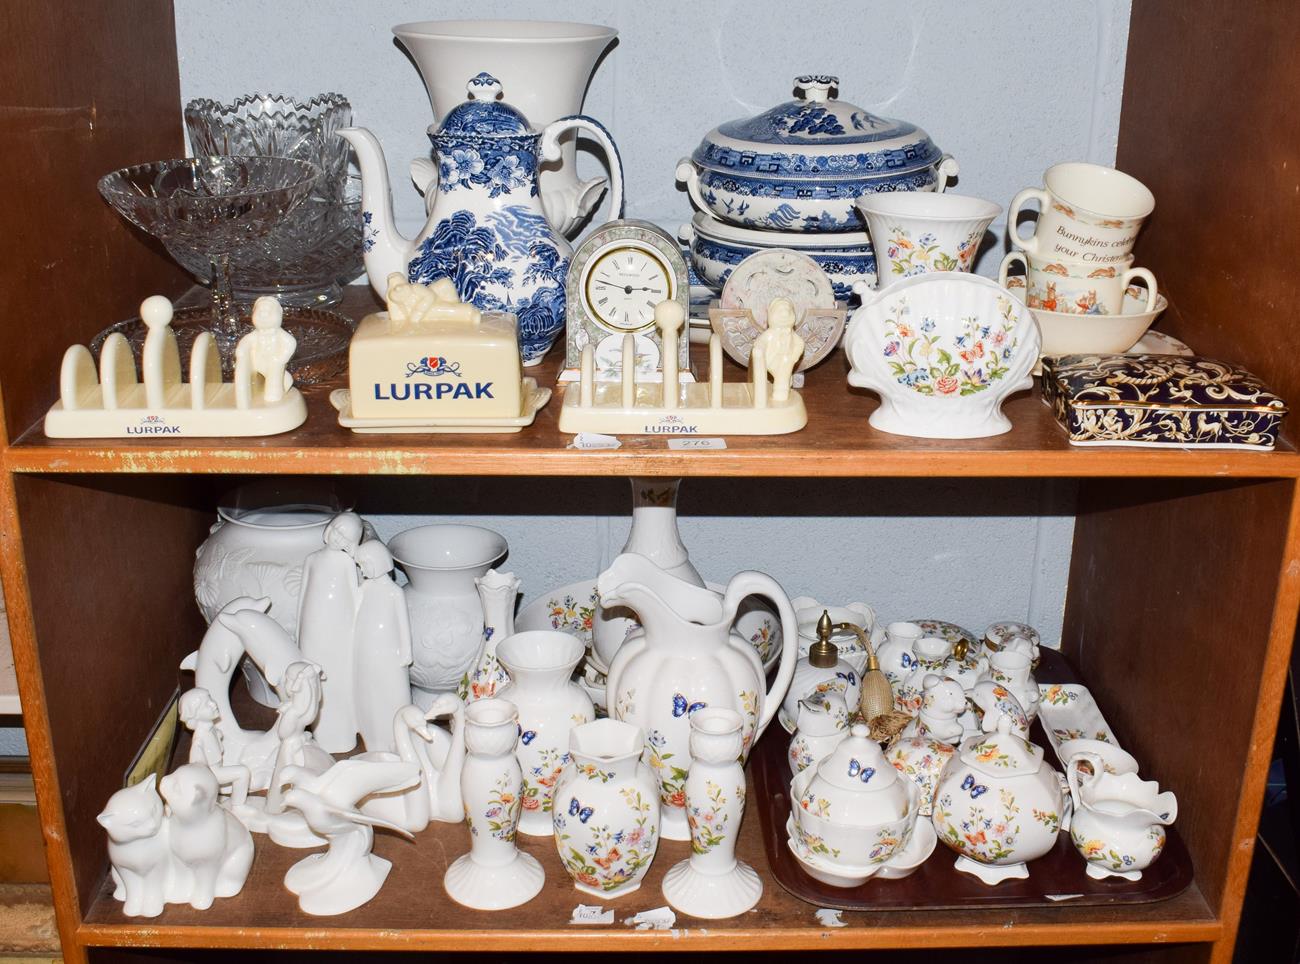 A quantity of Aynsley cottage garden, Royal Doulton image figures, Kaiser, cut glass, etc (two